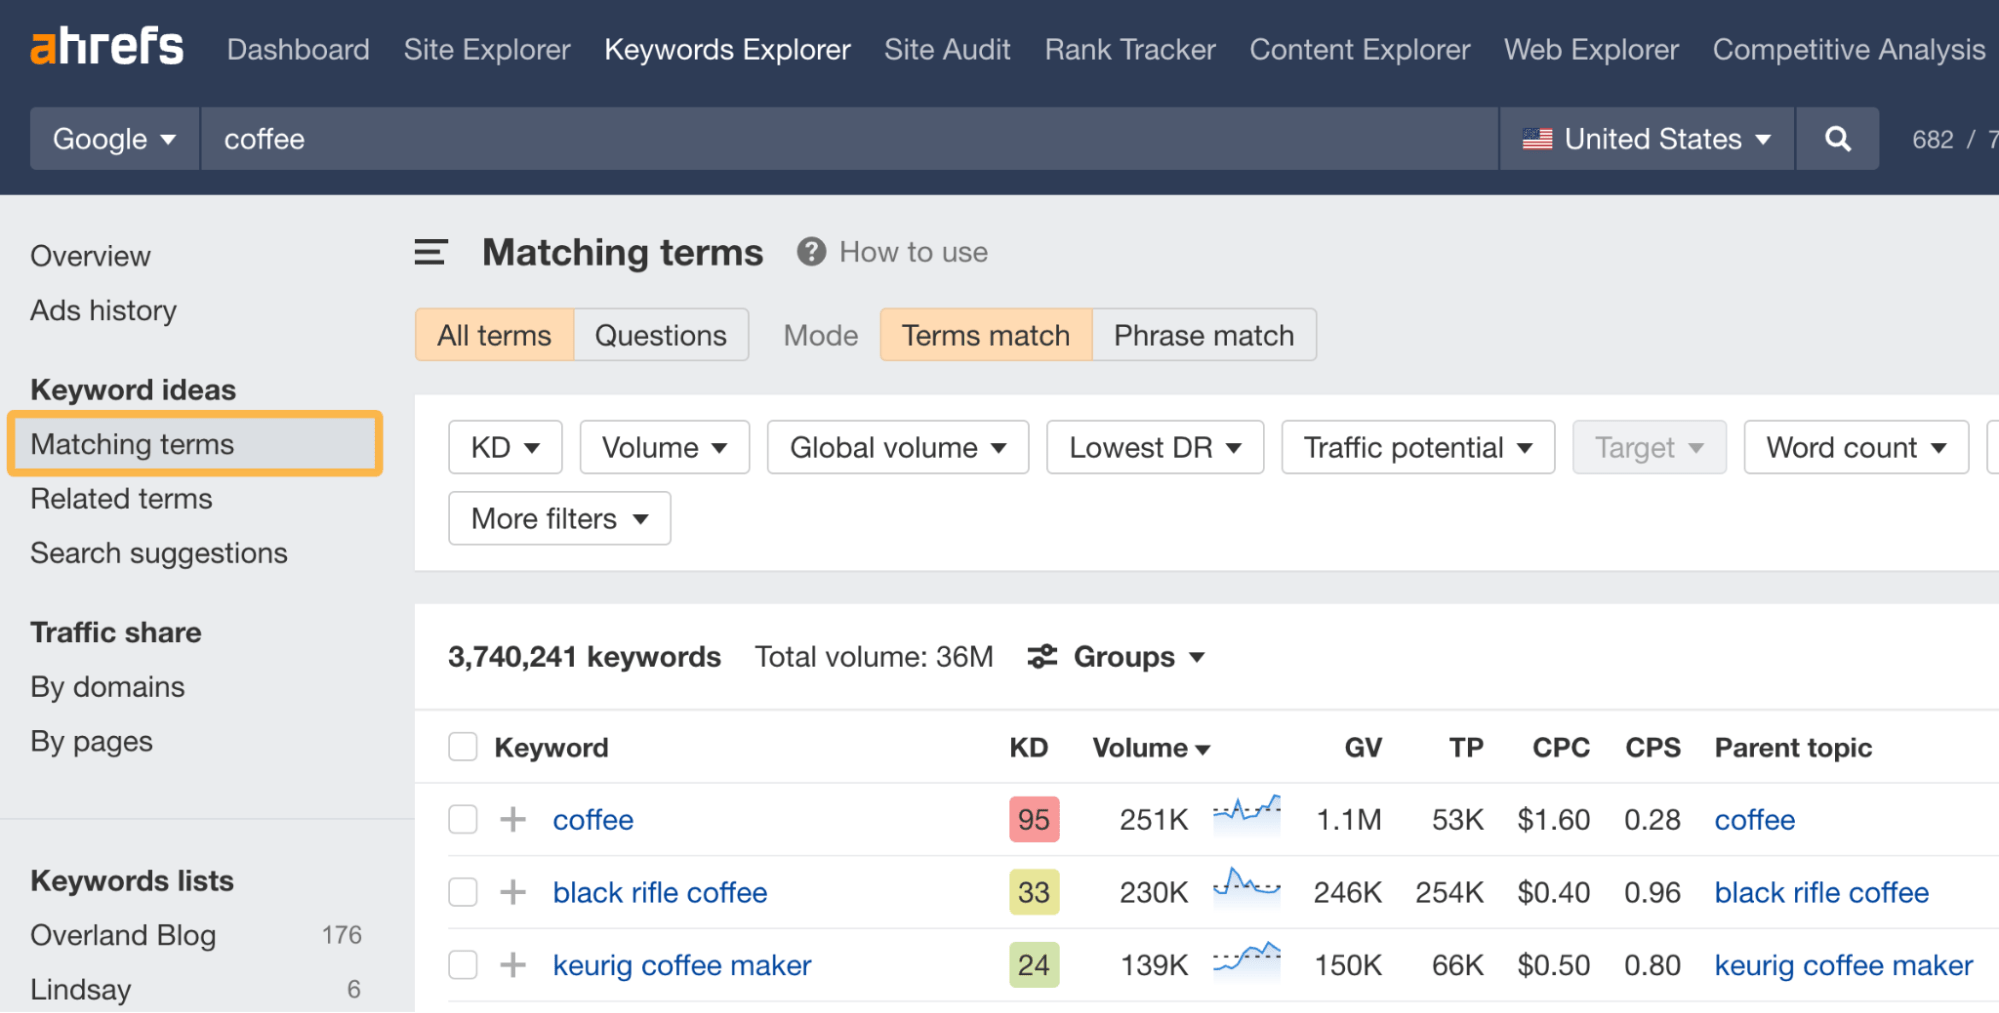 Mat،g terms report for "coffee" in Ahrefs' Keywords Explorer